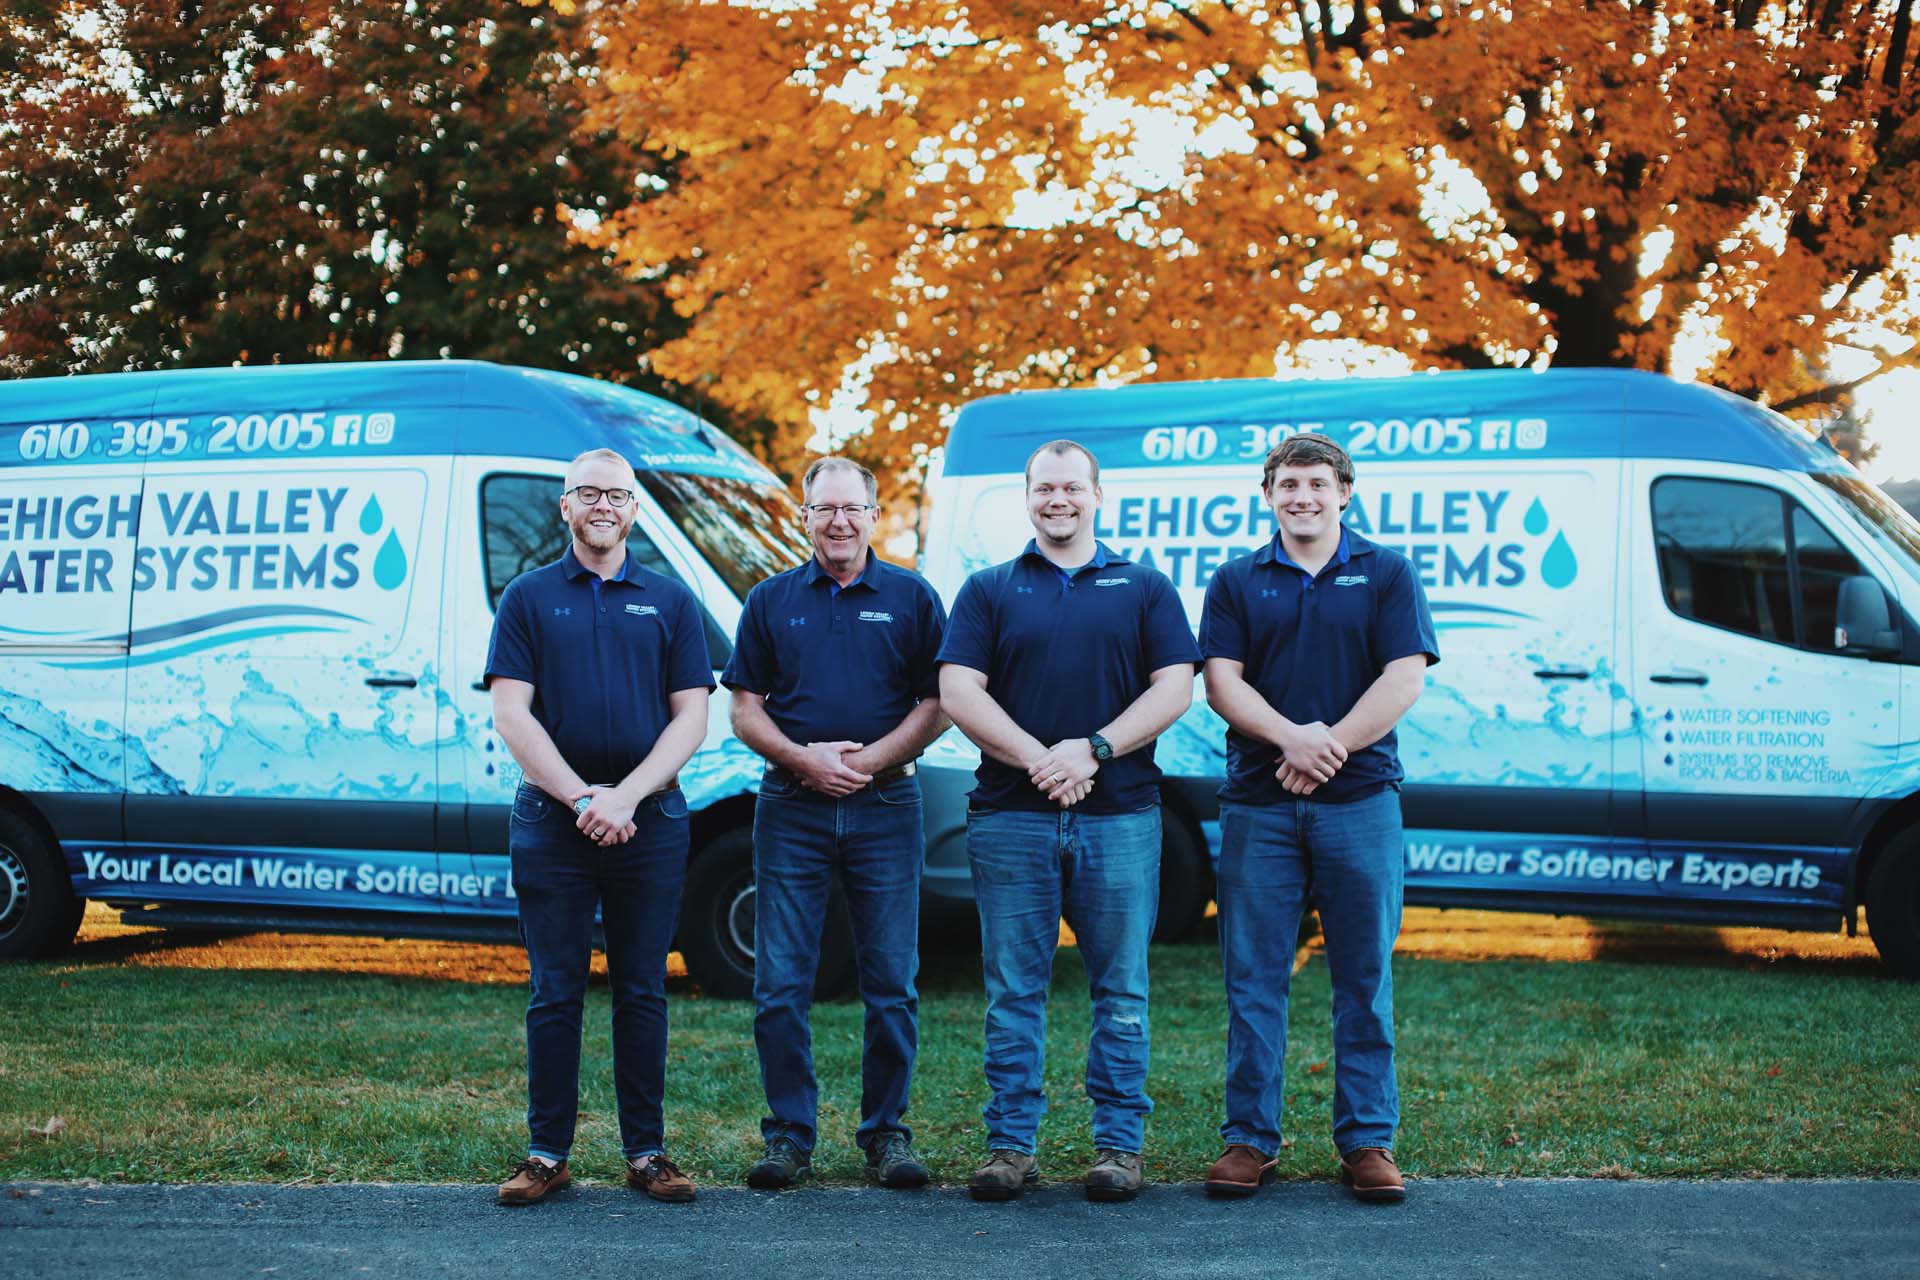 Lehigh Valley Water Systems Employees